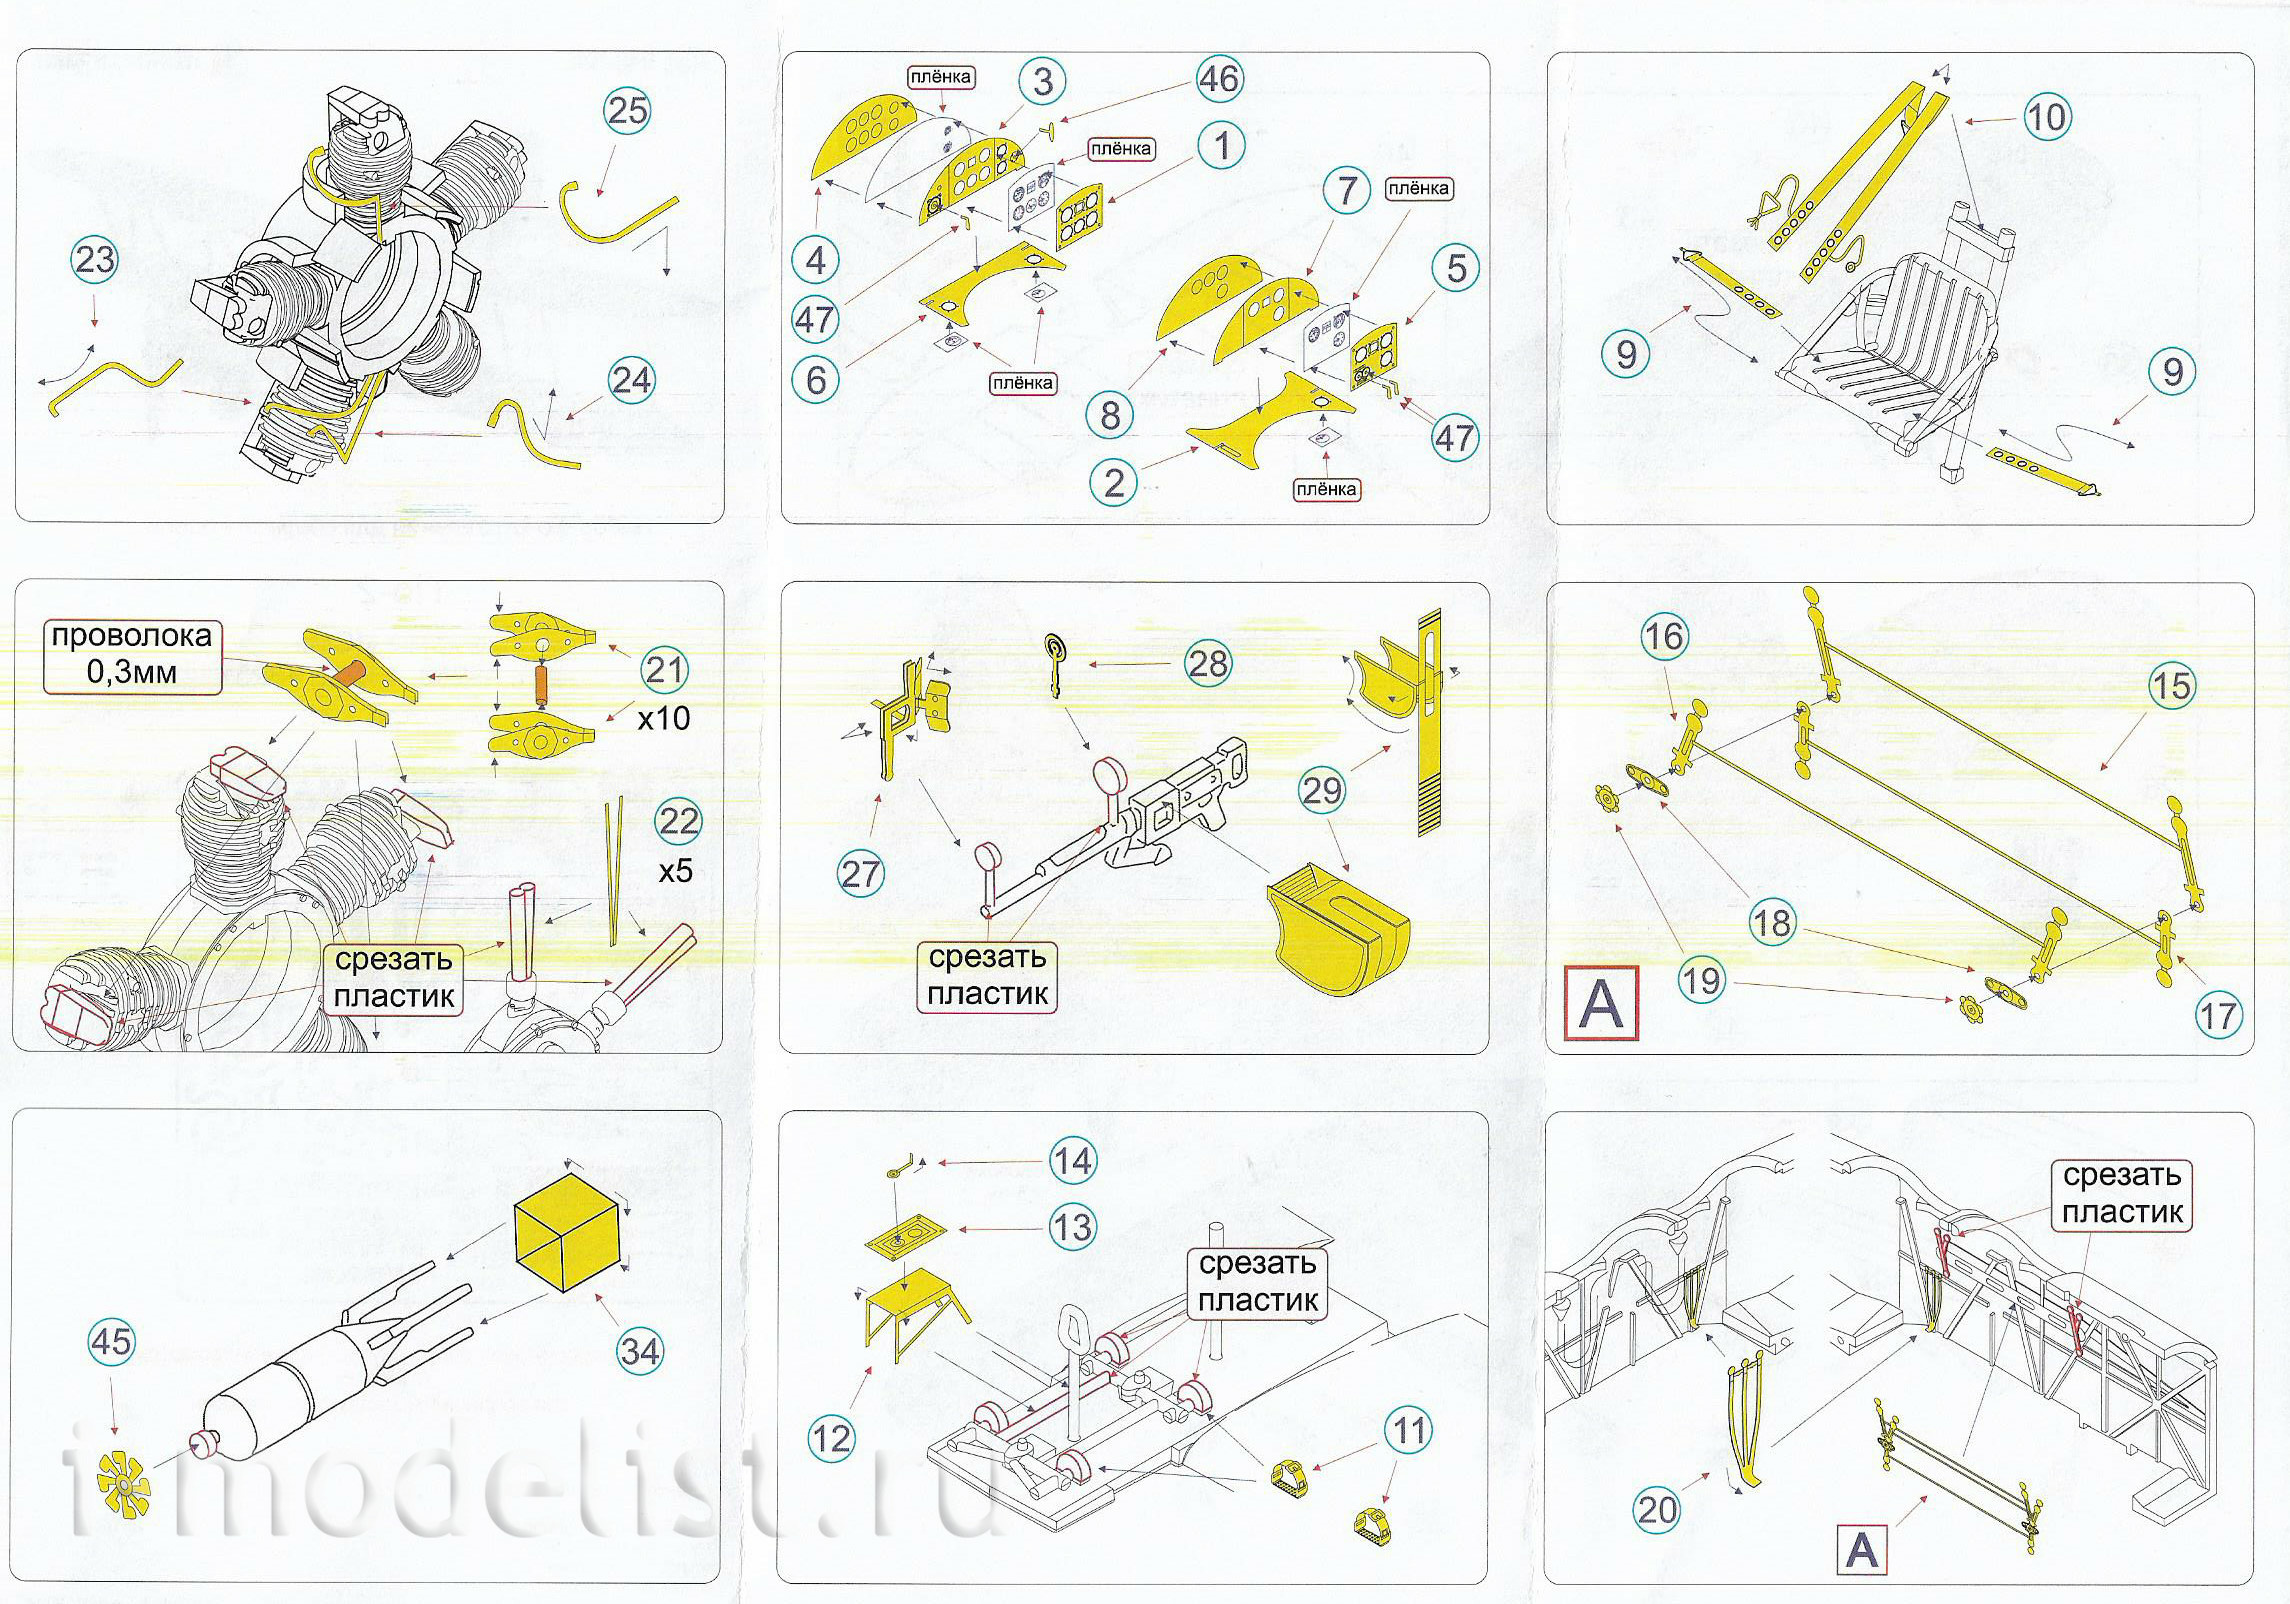 048208 Microdesign 1/48 Po-2 from ICM